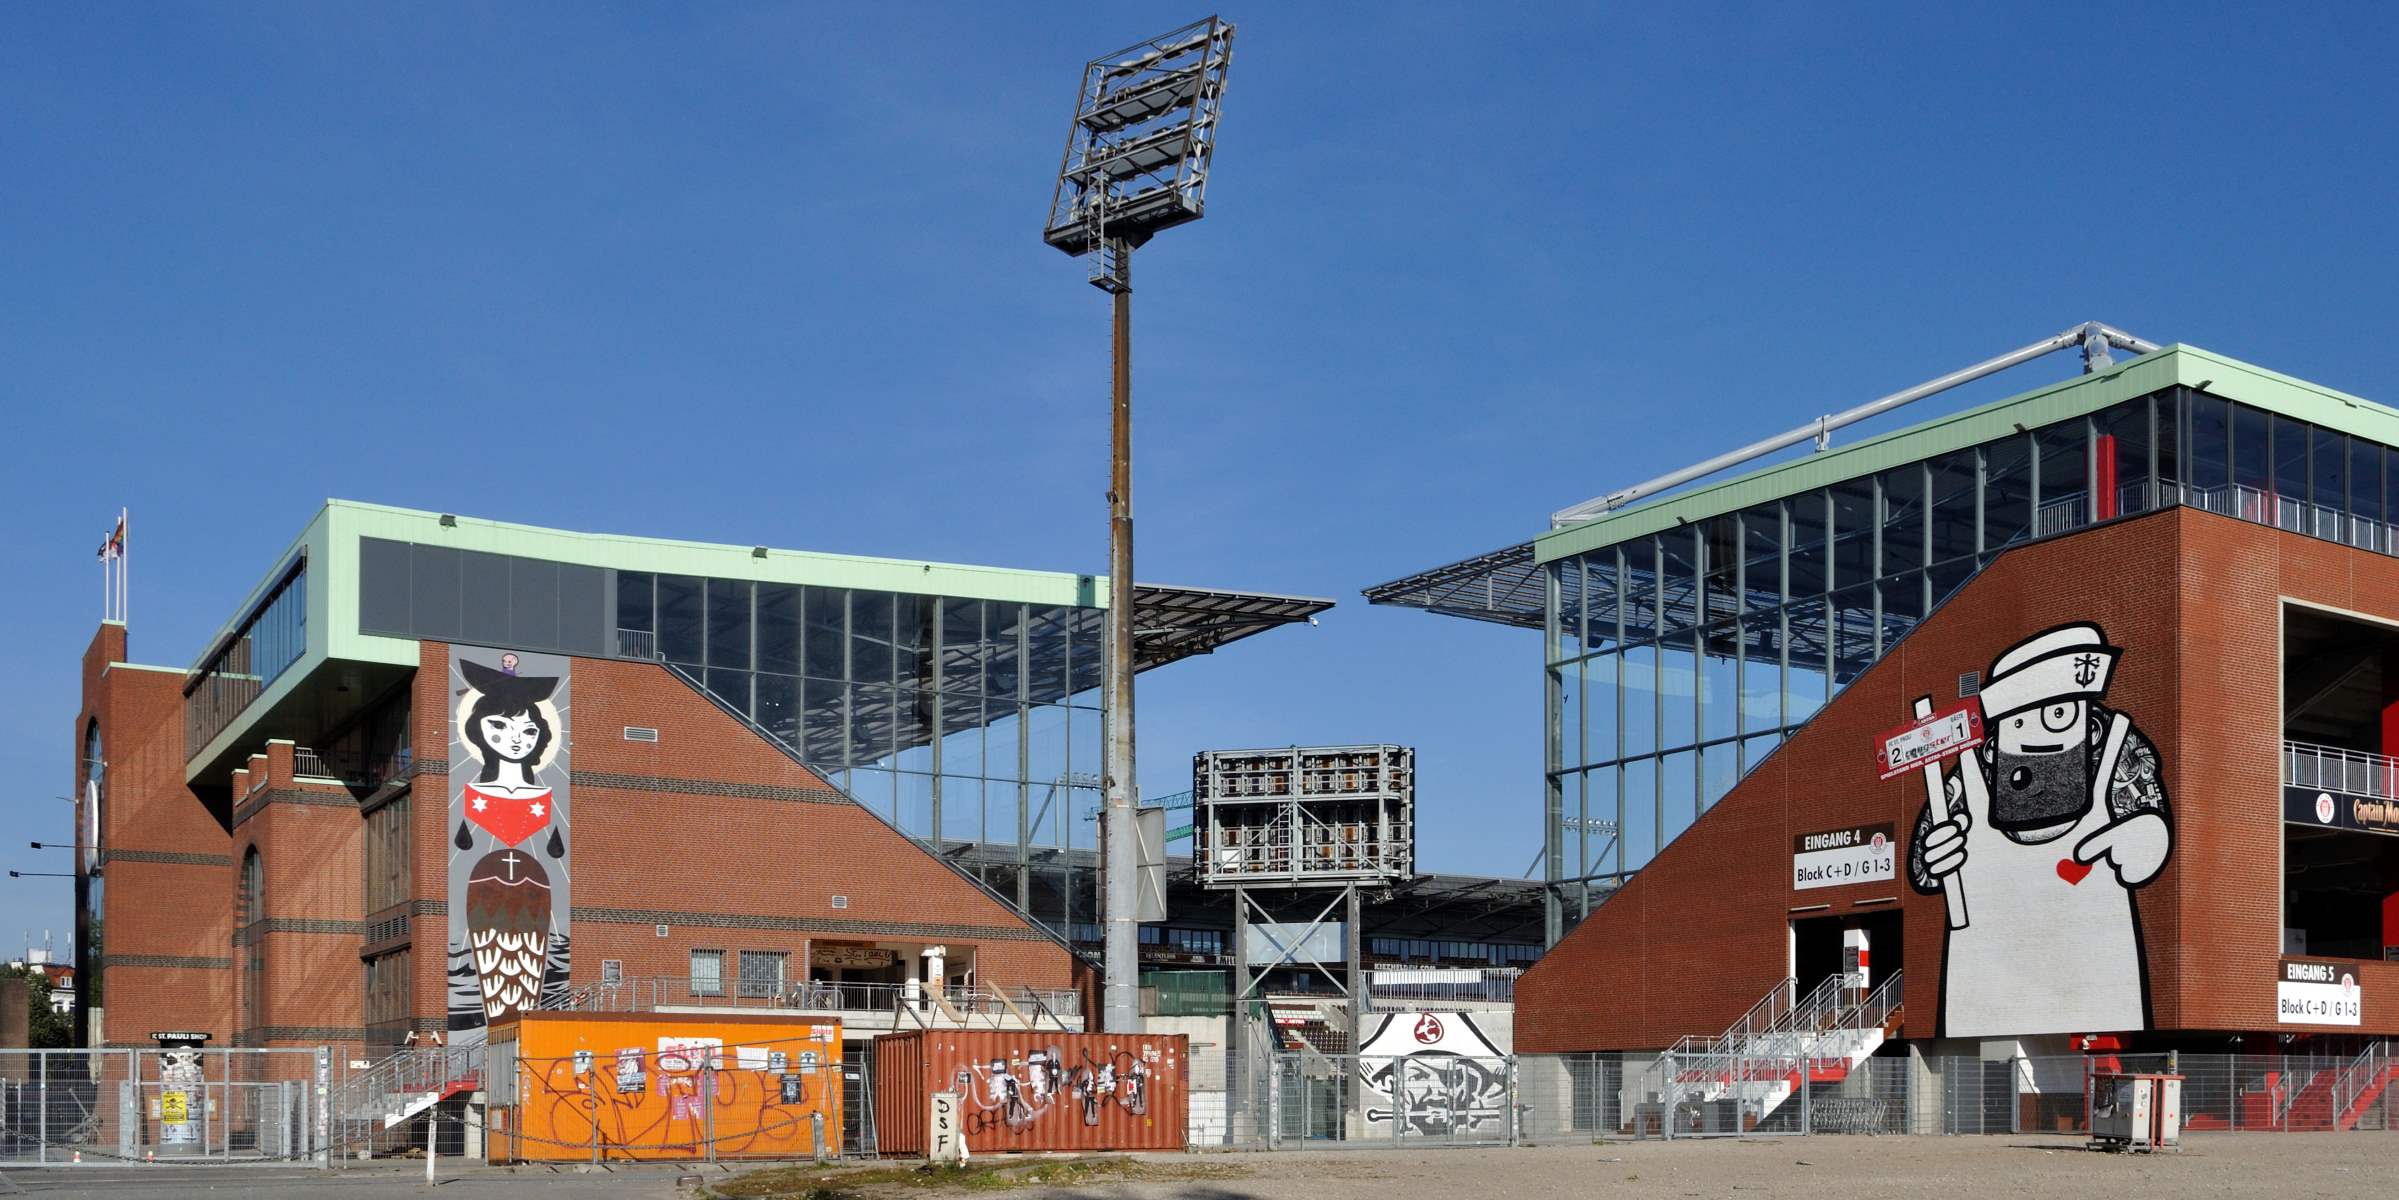 19-surprising-facts-about-millerntor-stadion